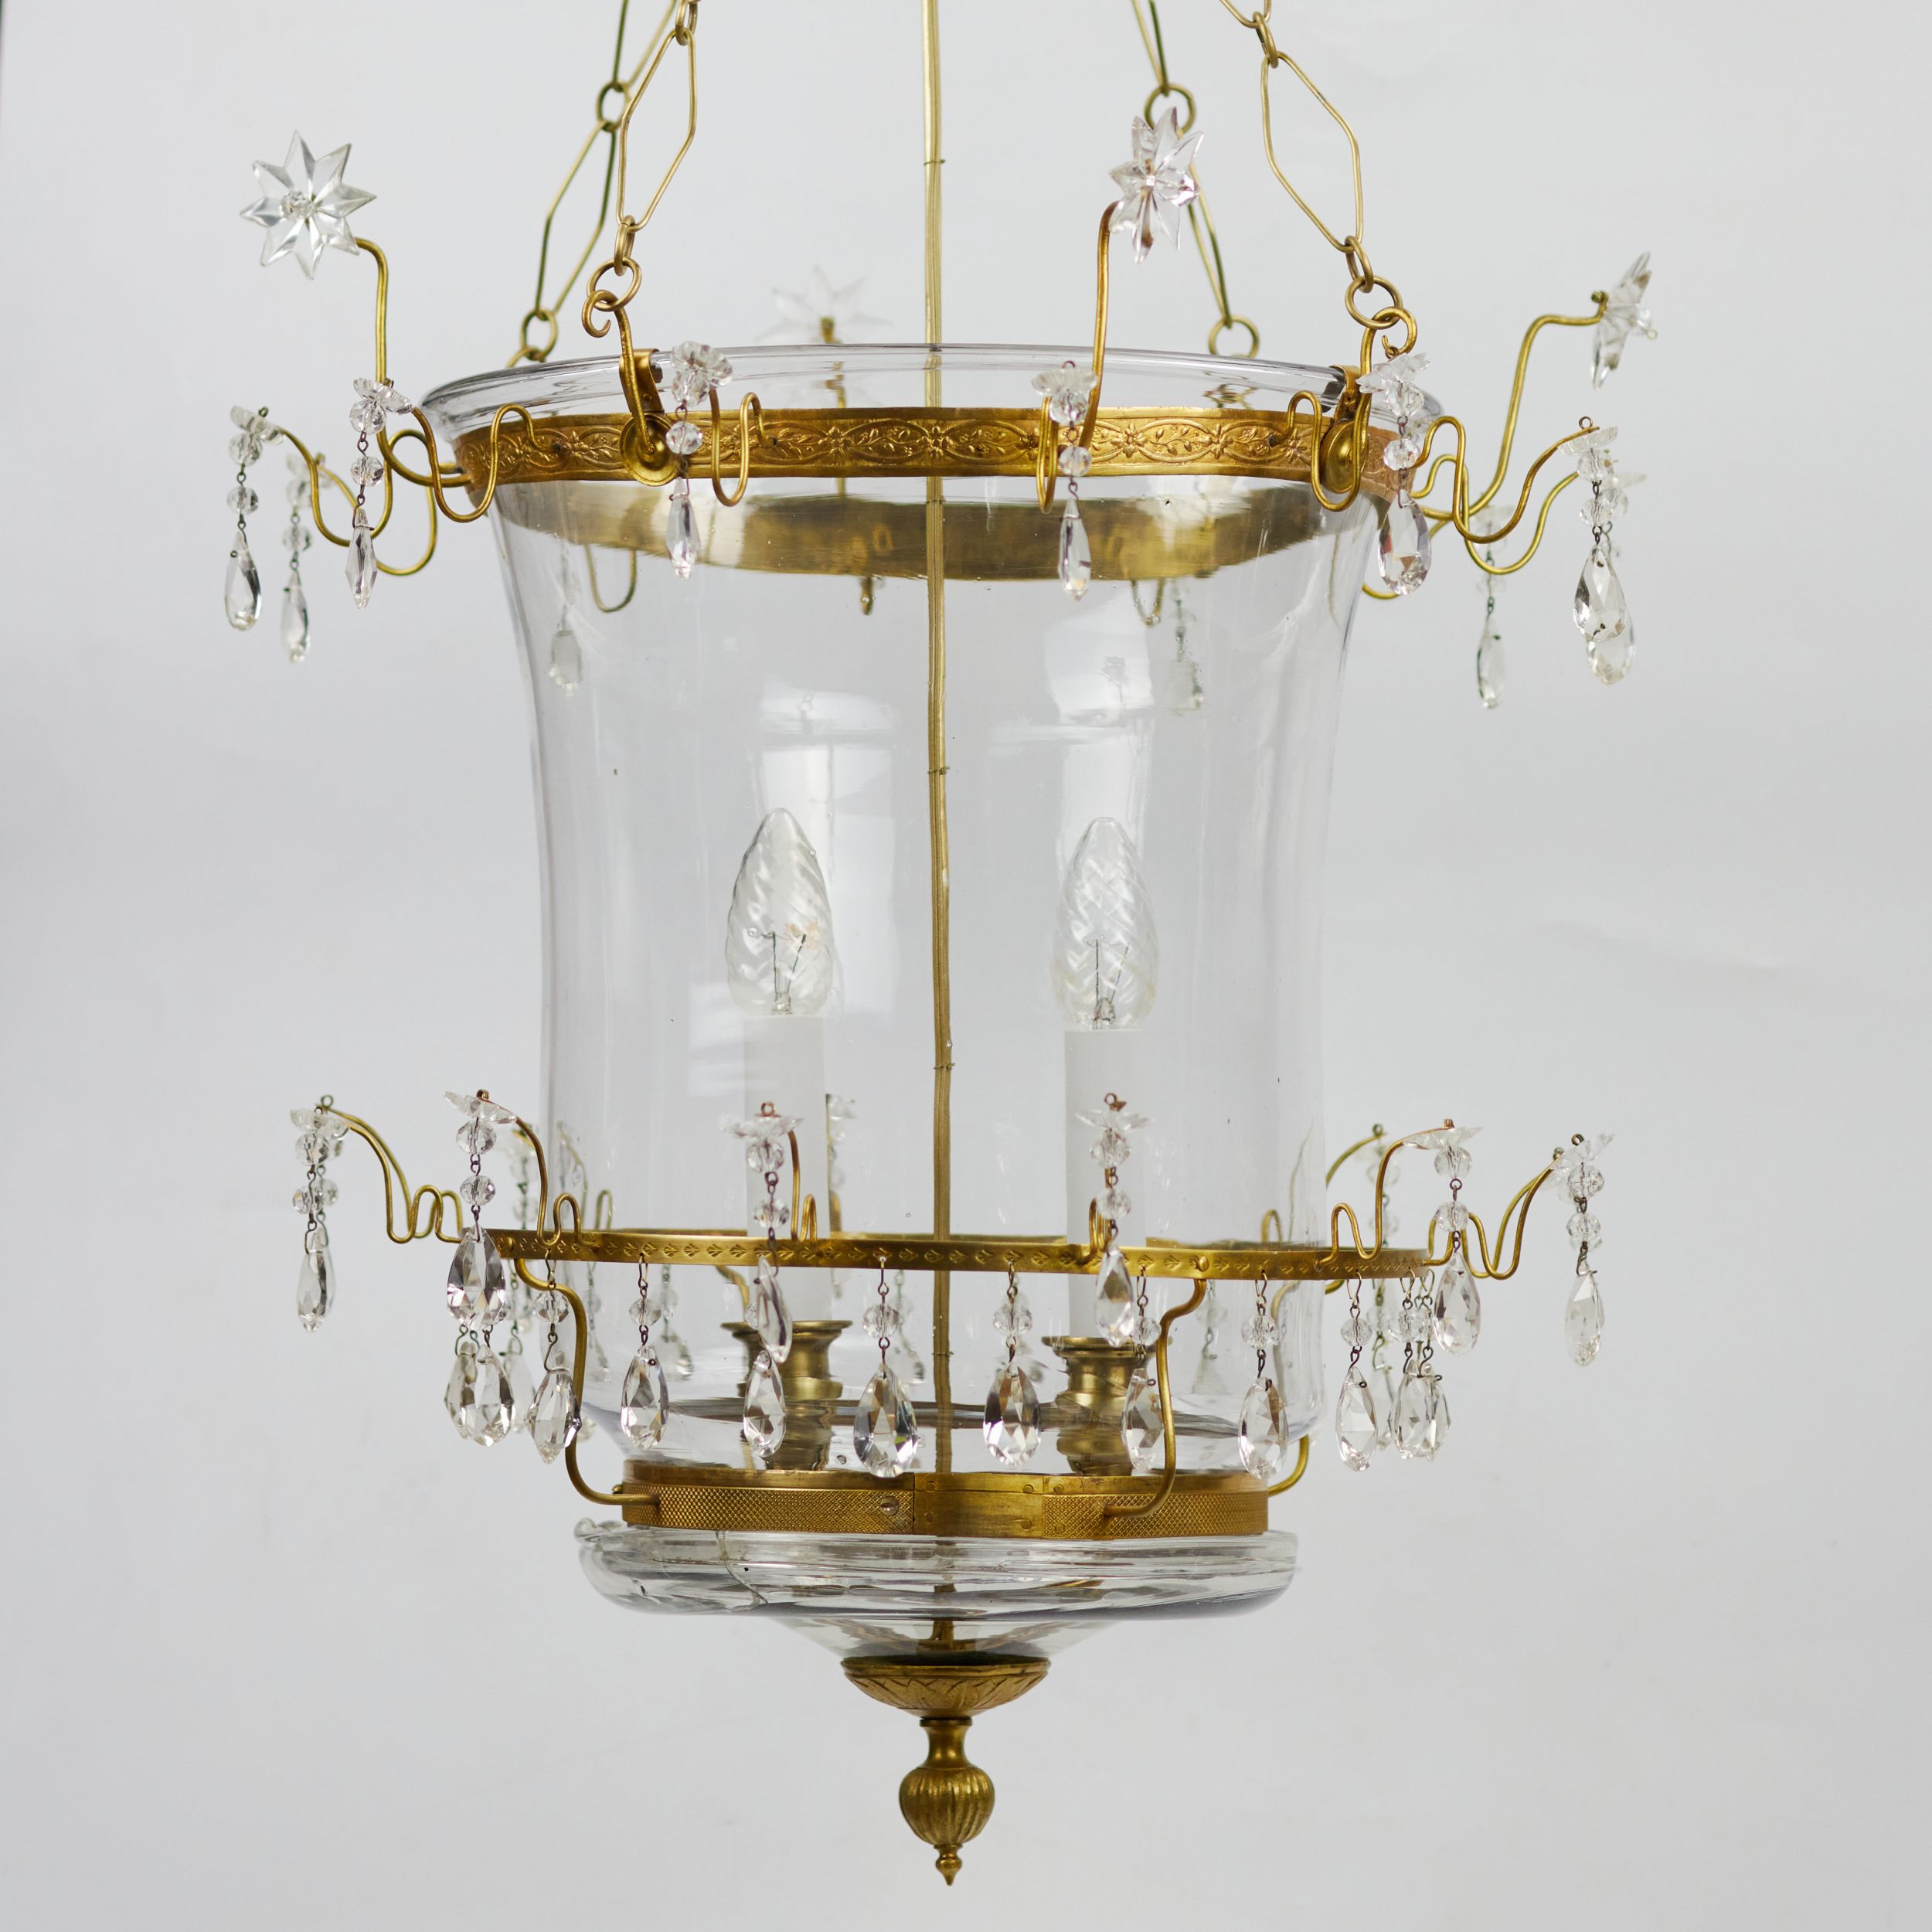 Russian Crystal & Ormolu Mounted Two-Light Lantern Chandelier.Russia, early 19th century. - Image 5 of 5